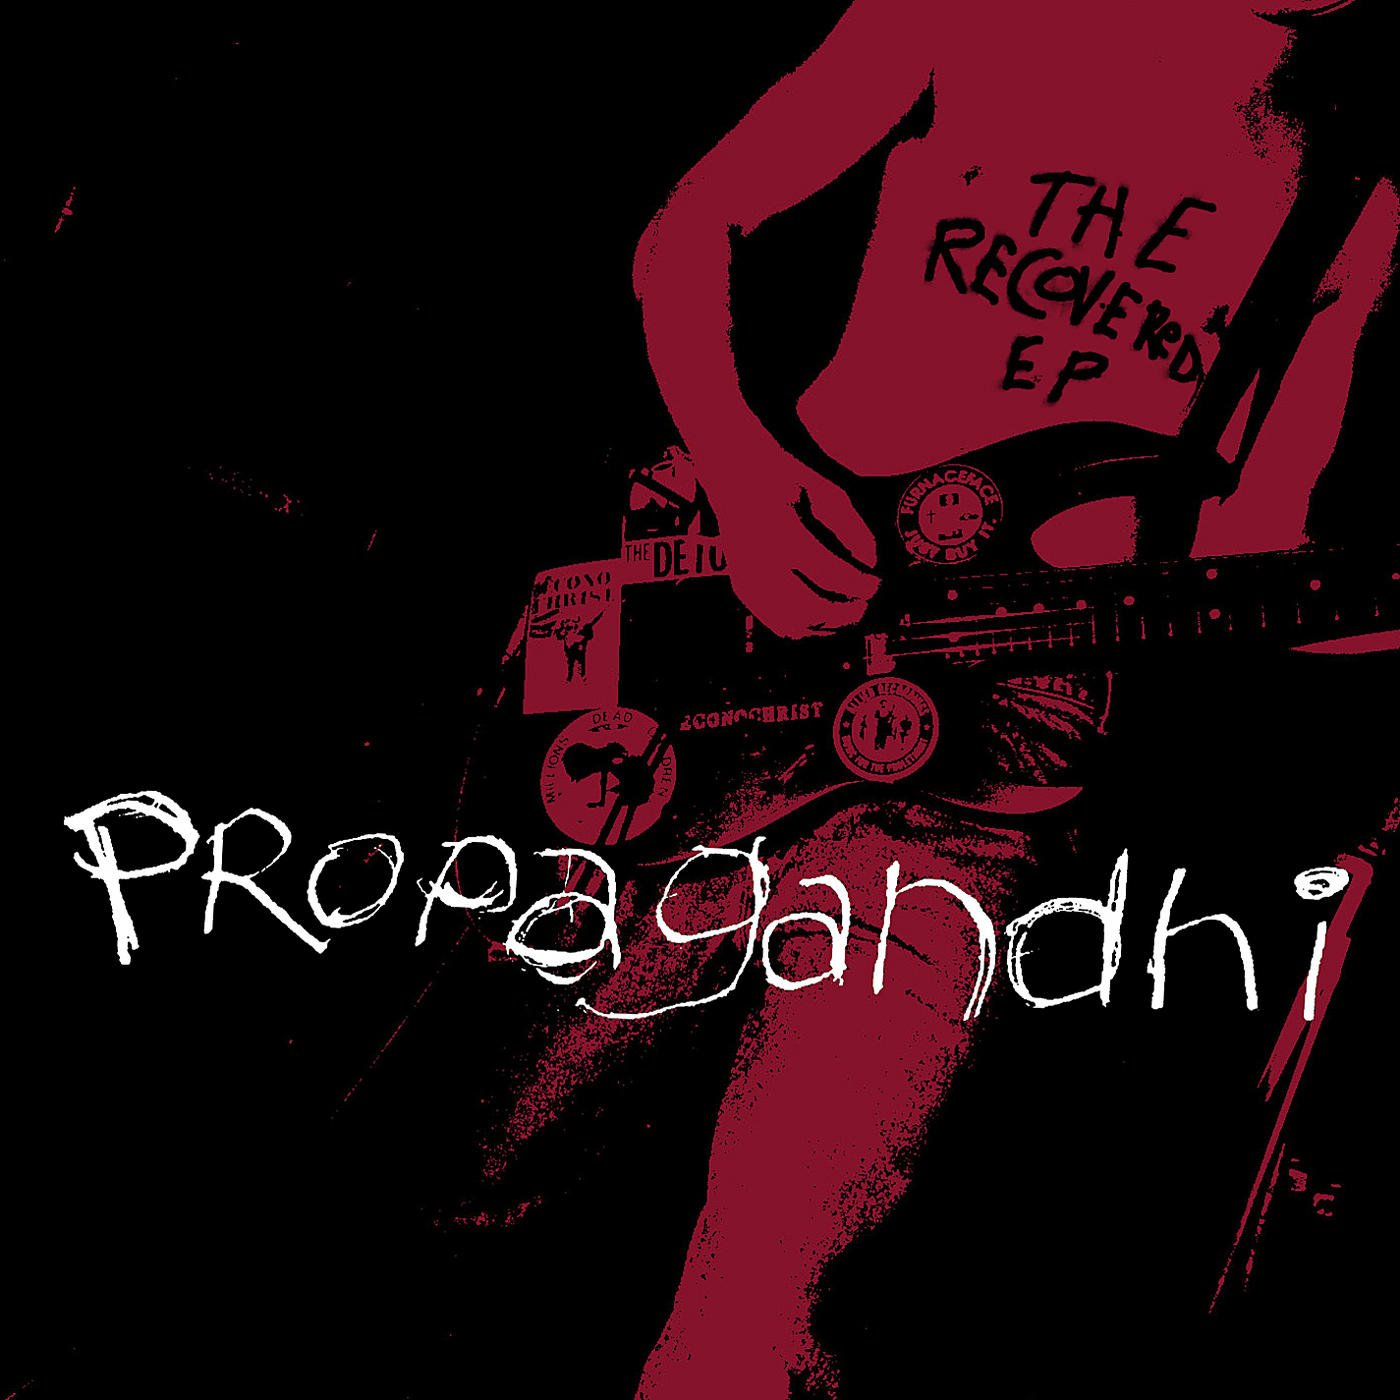 Last available. Propagandhi the recovered Ep. Recovered. Ep. Diva - Warsaw [Ep] (2010).